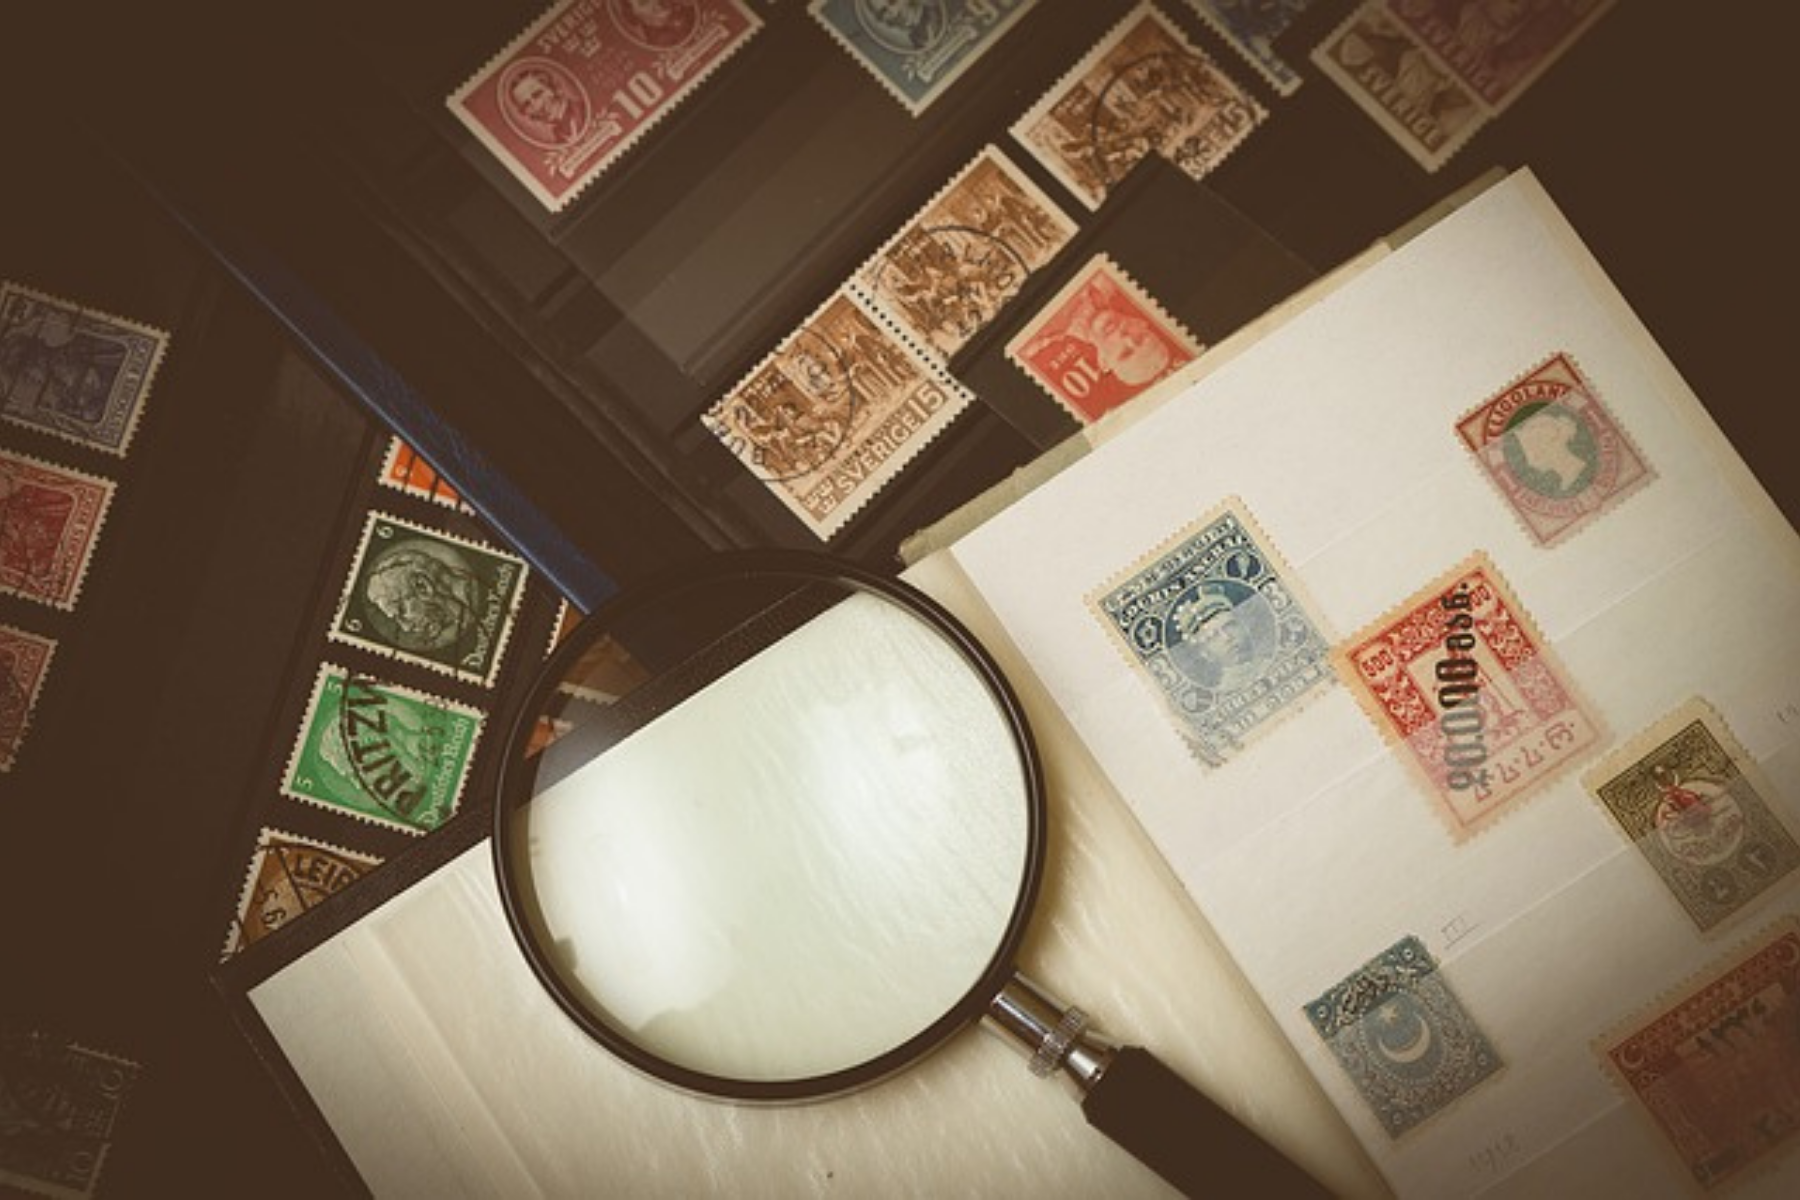 Magnifying glass on paper with stamps